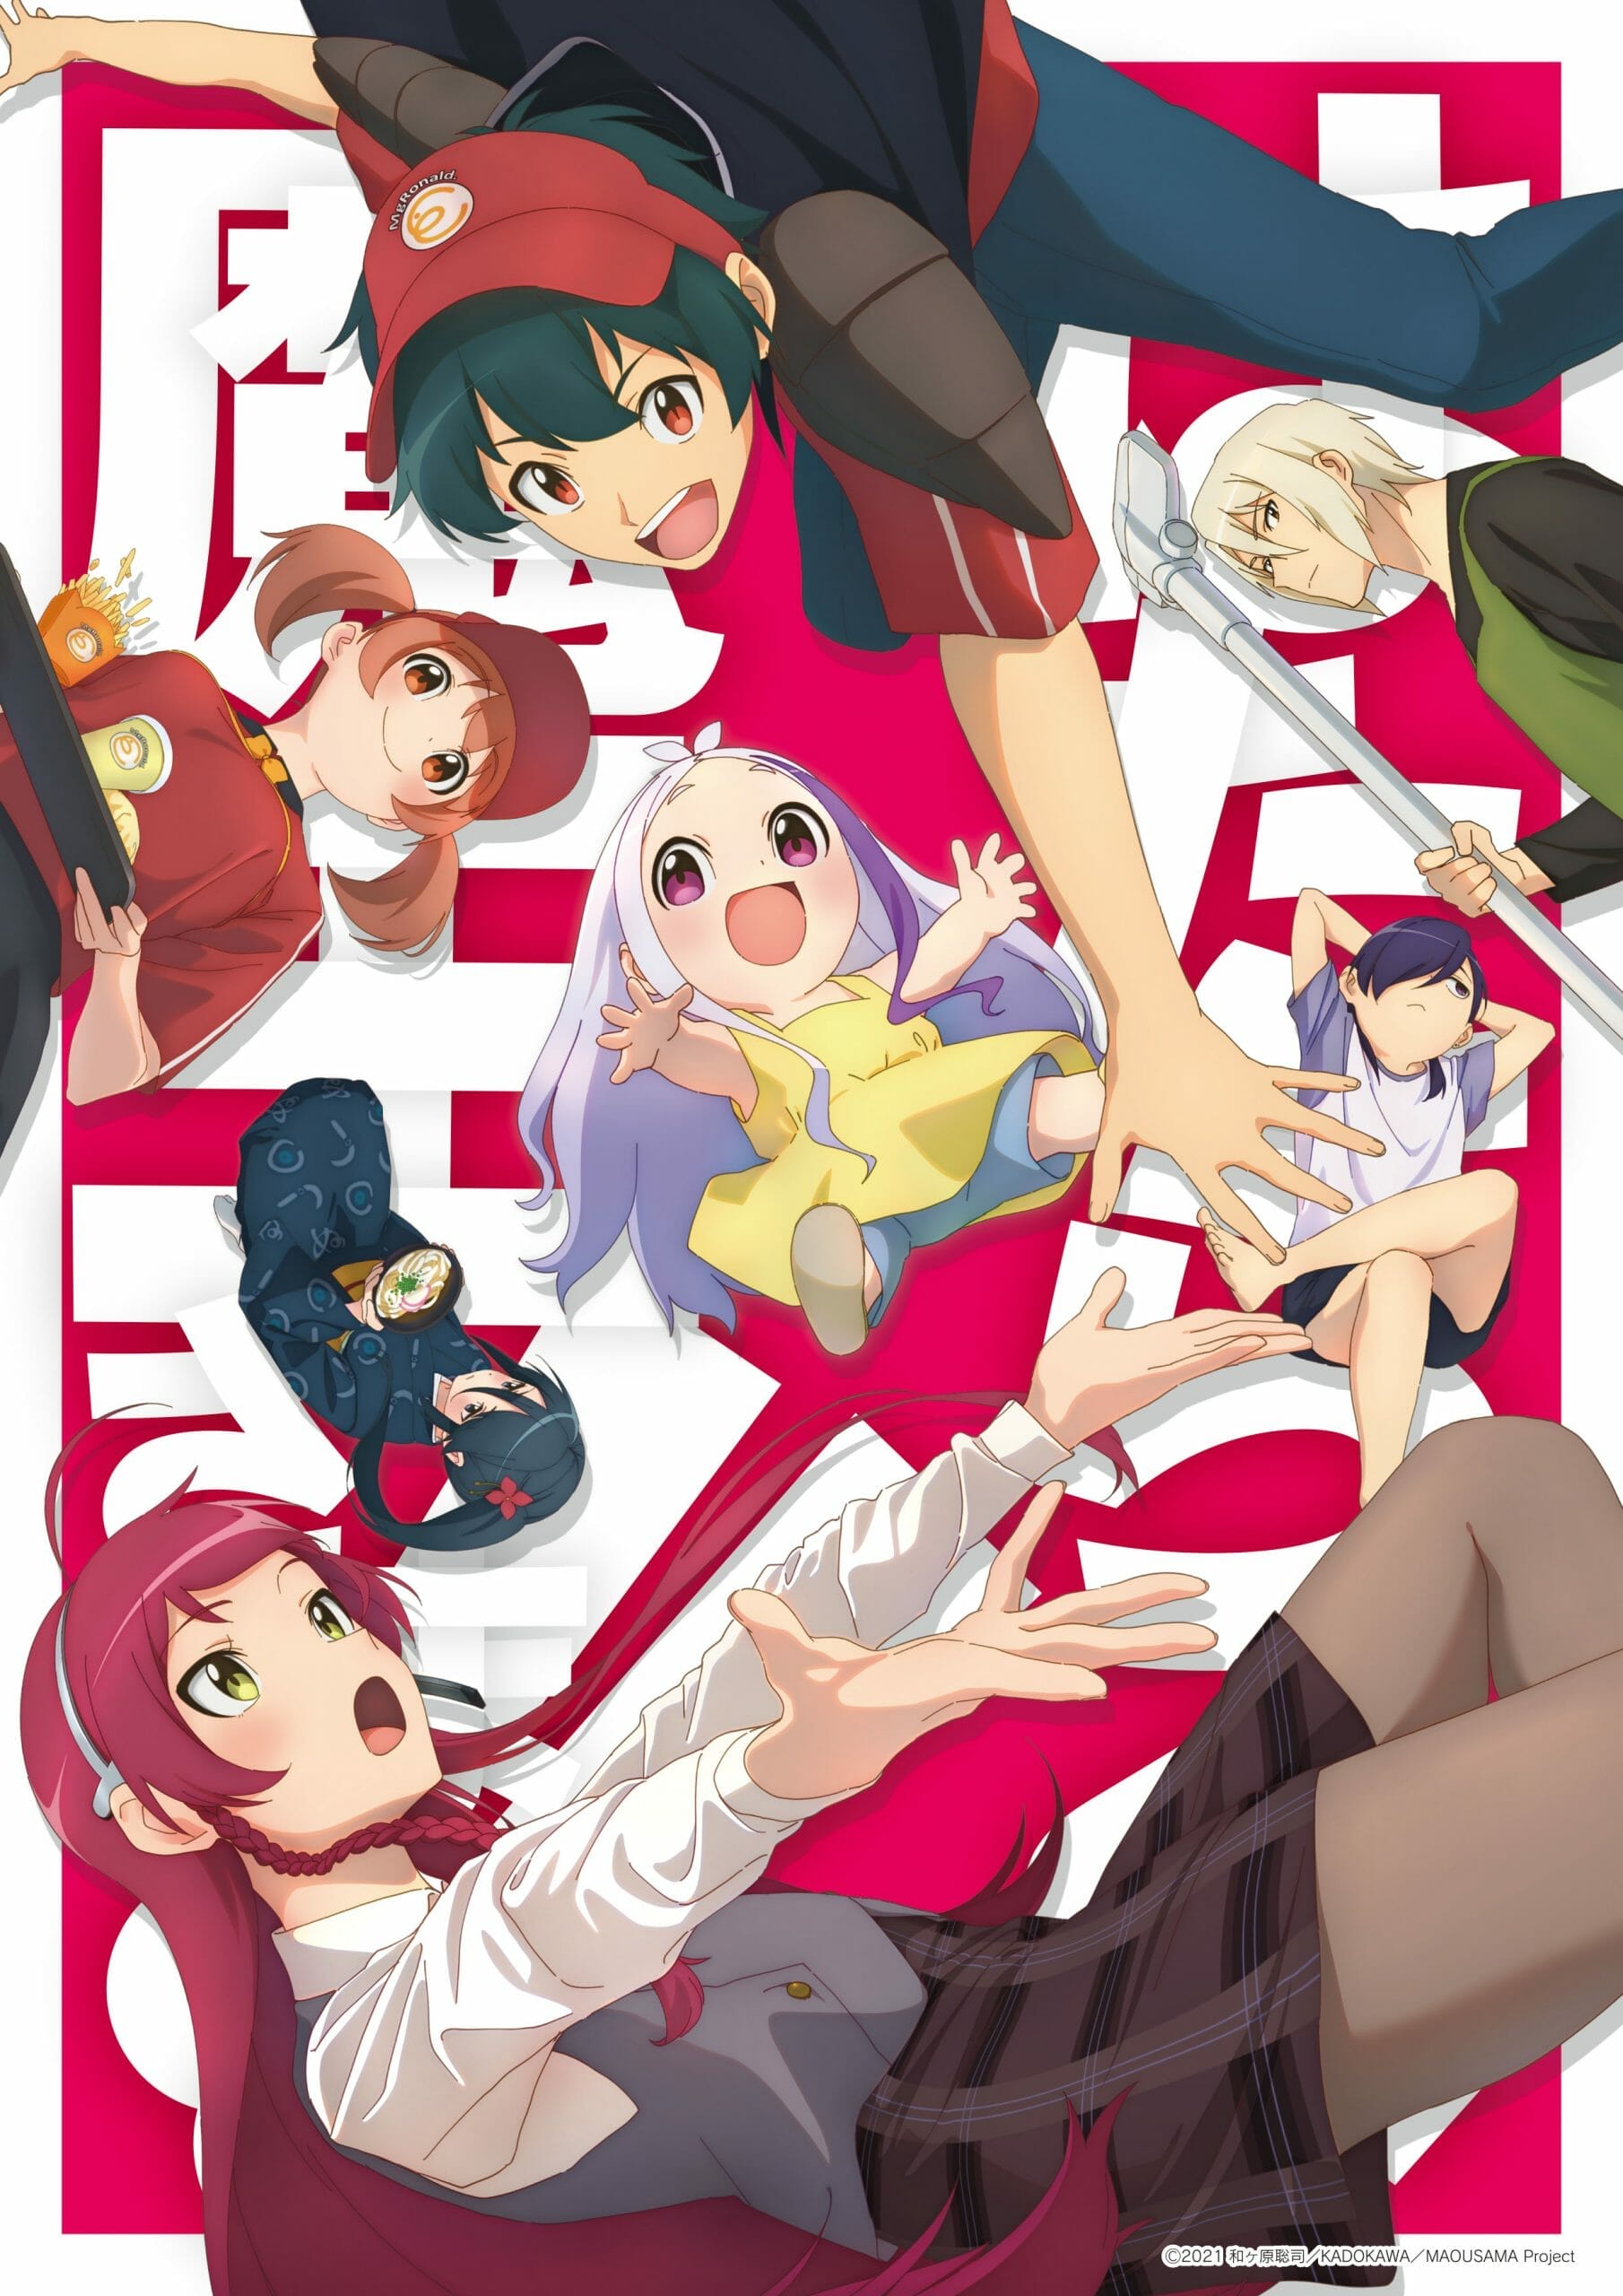 Satan Is Serving Burgers and Fries in 'The Devil Is a Part-Timer!